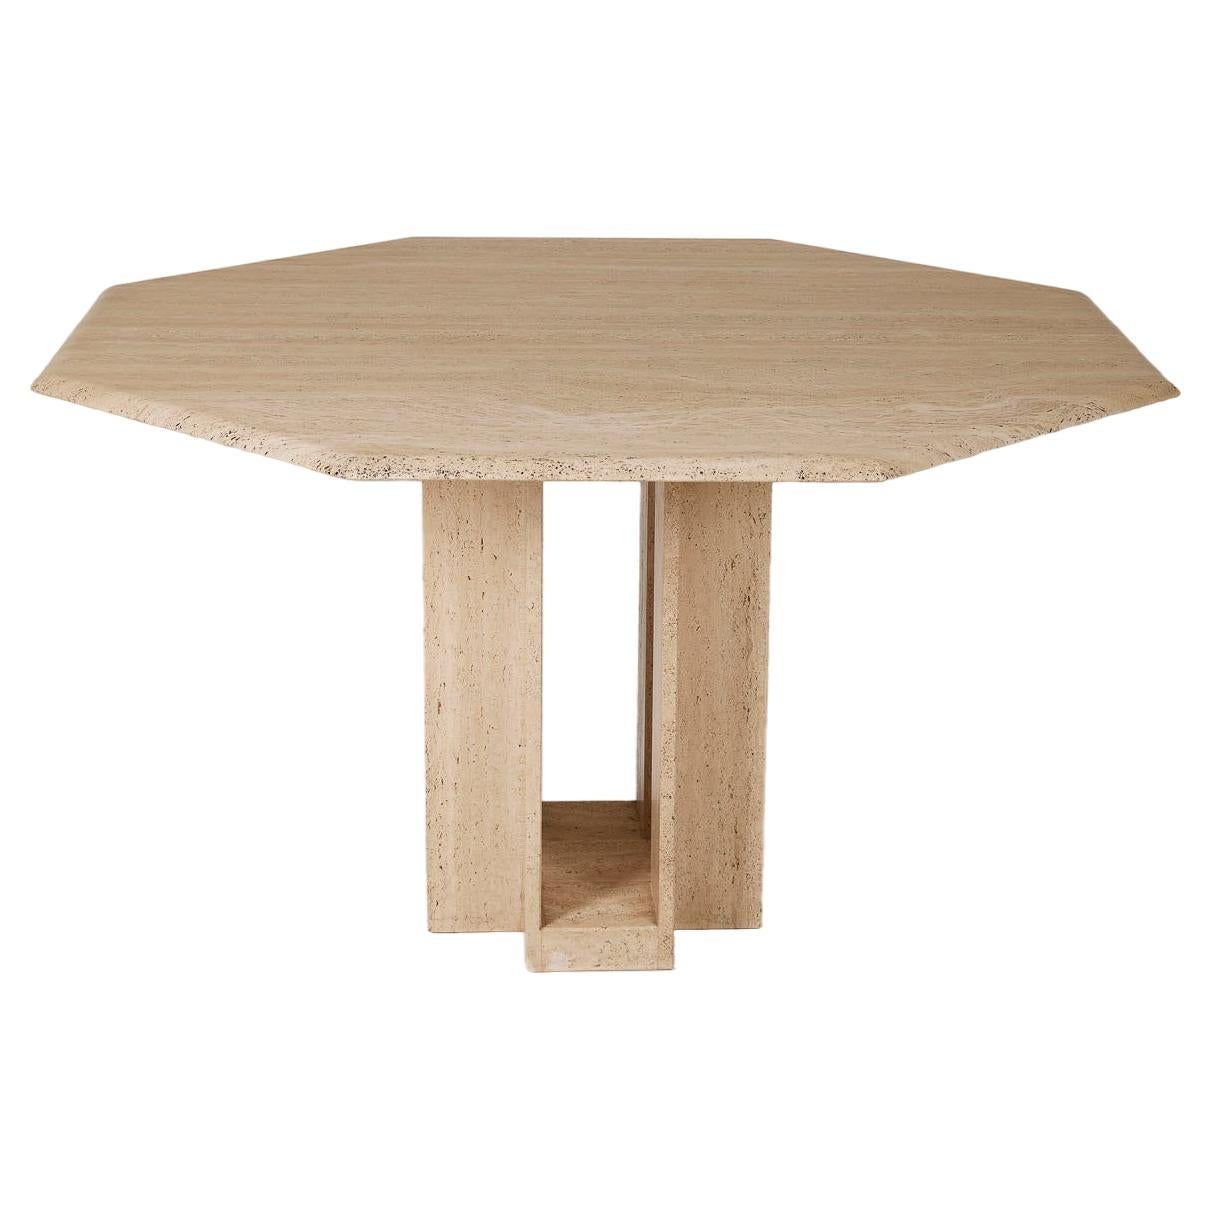 Octagonal travertine table For Sale